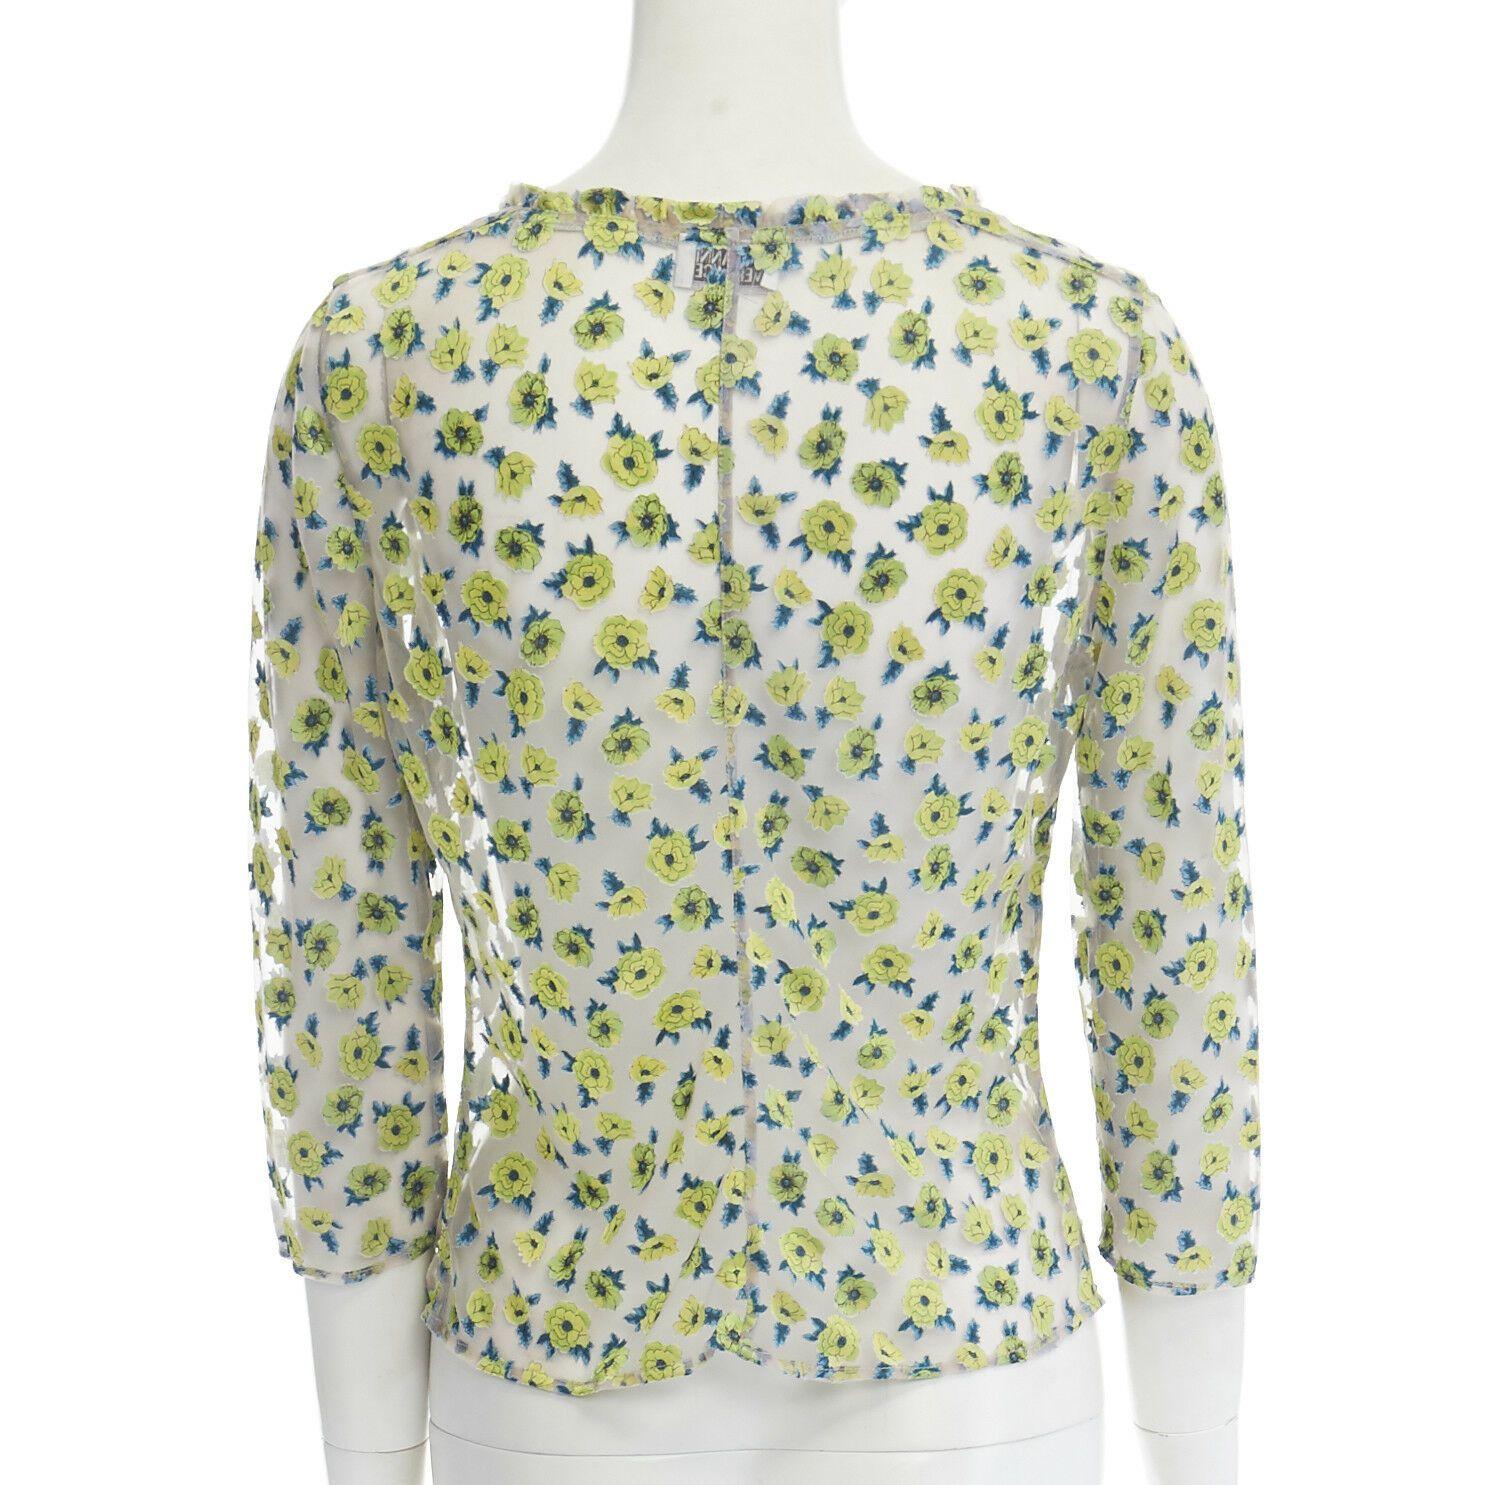 GIANNI VERSACE Vintage SS96 green floral sheer devore cropped sleeve top IT40 S 2